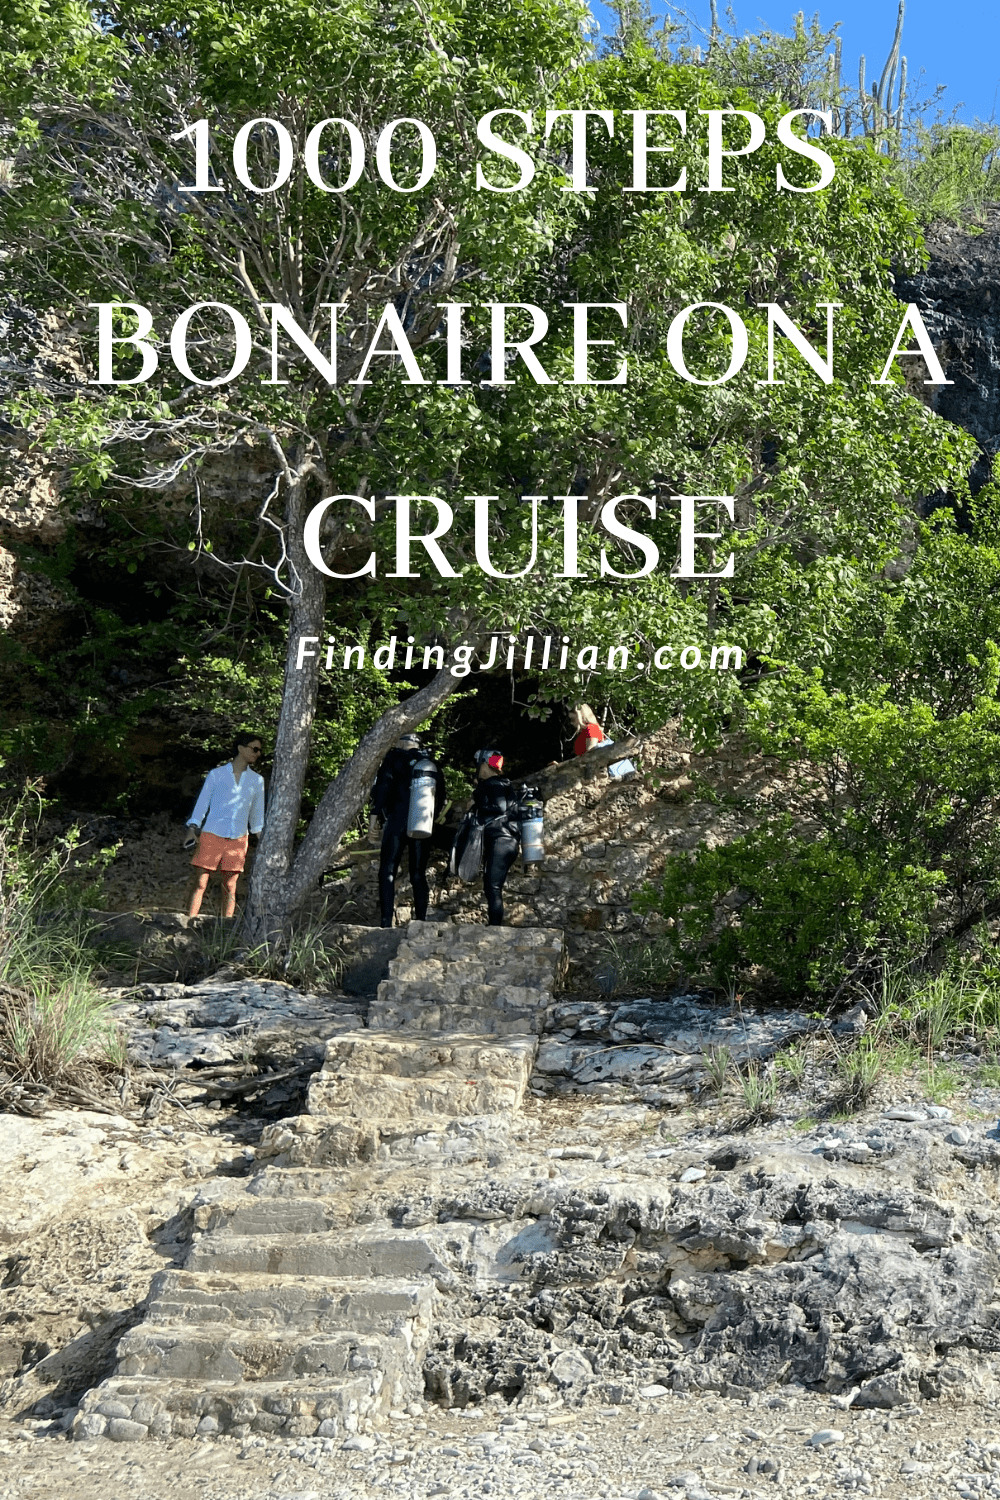 image of 1000 steps in bonaire on a cruise